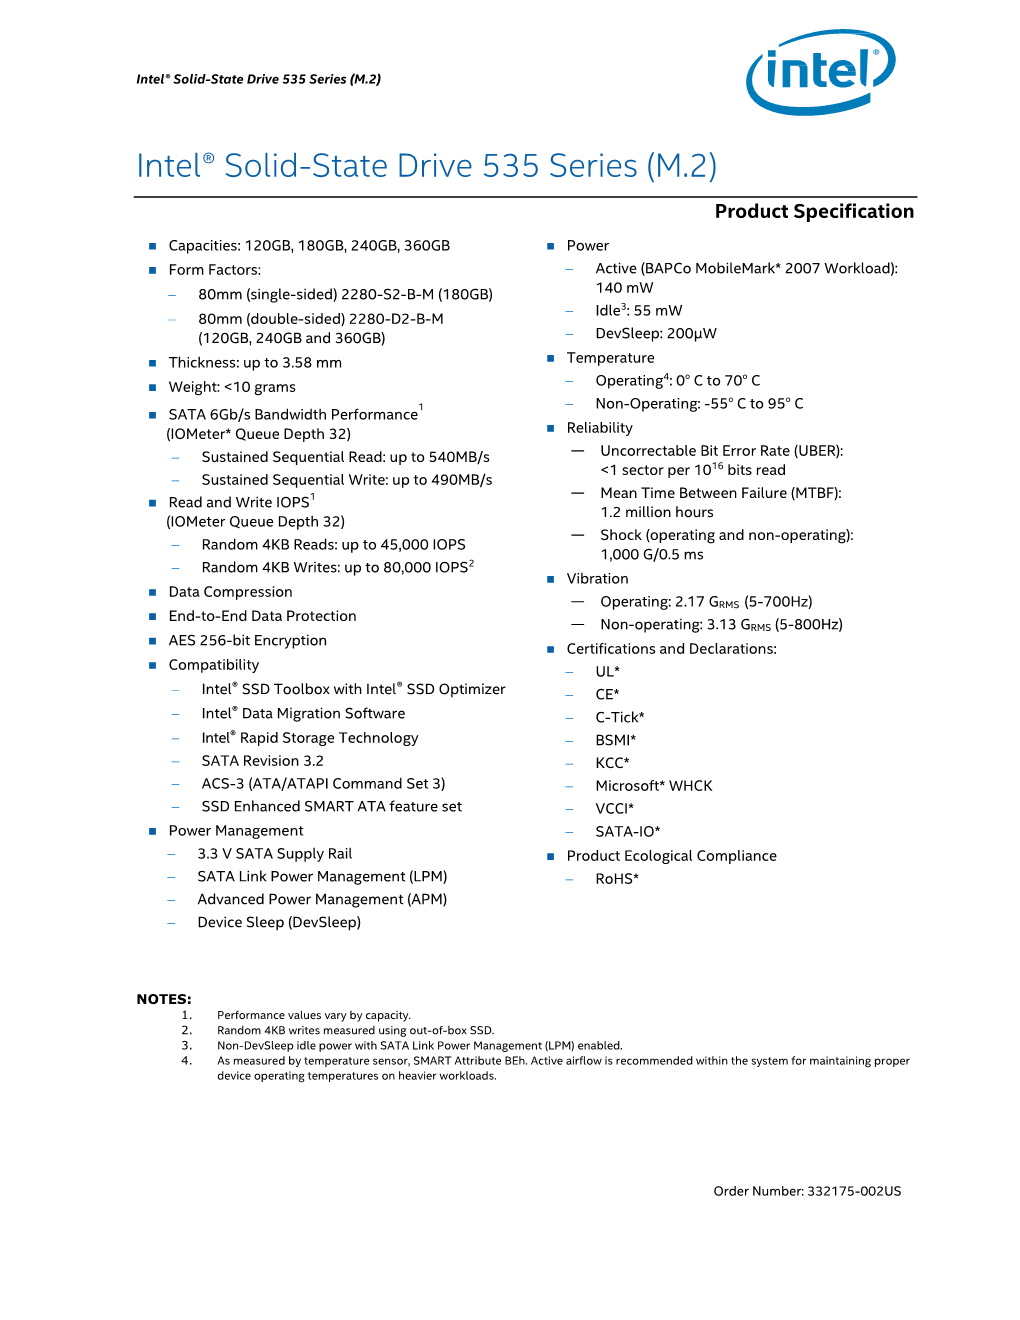 Intel® Solid-State Drive 535 Series (M.2) Product Specification